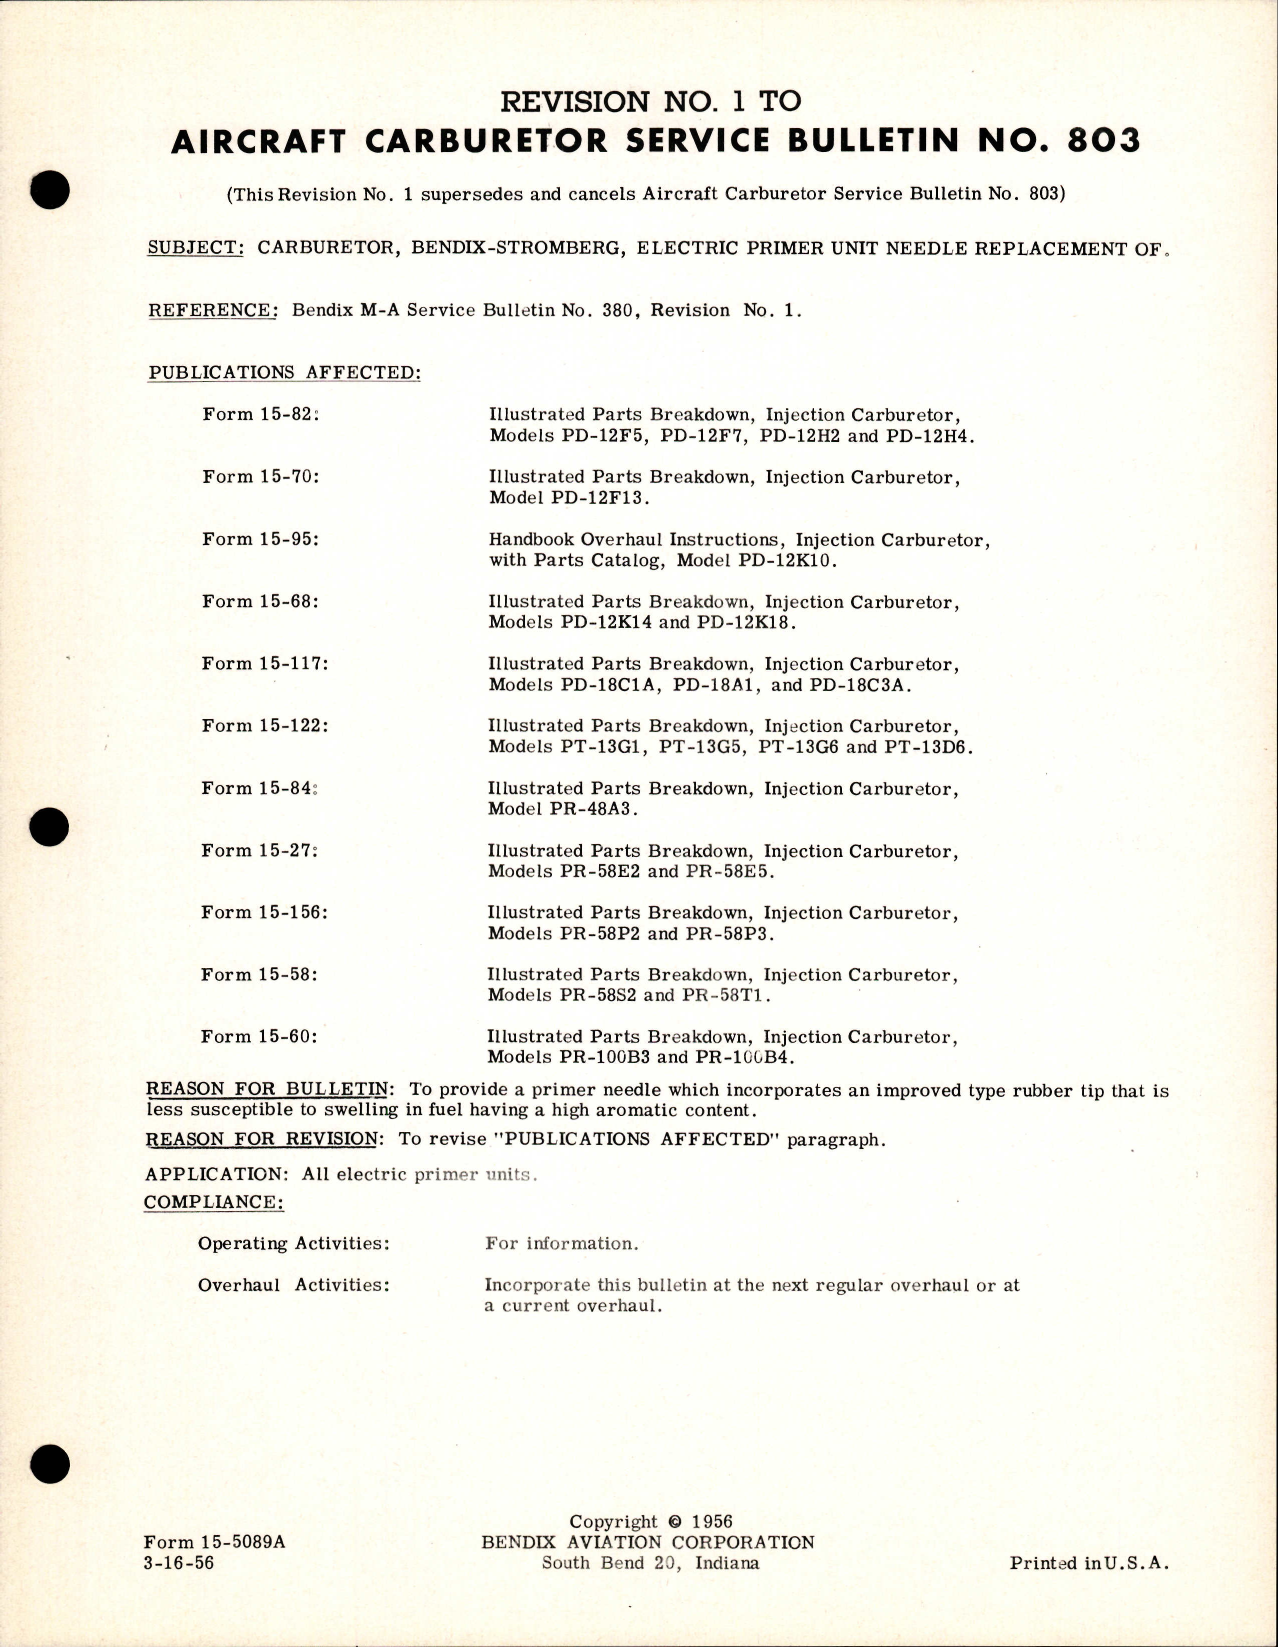 Sample page 1 from AirCorps Library document: Carburetor, Bendix Stromberg, Electric Primer Unit Needle Replacement